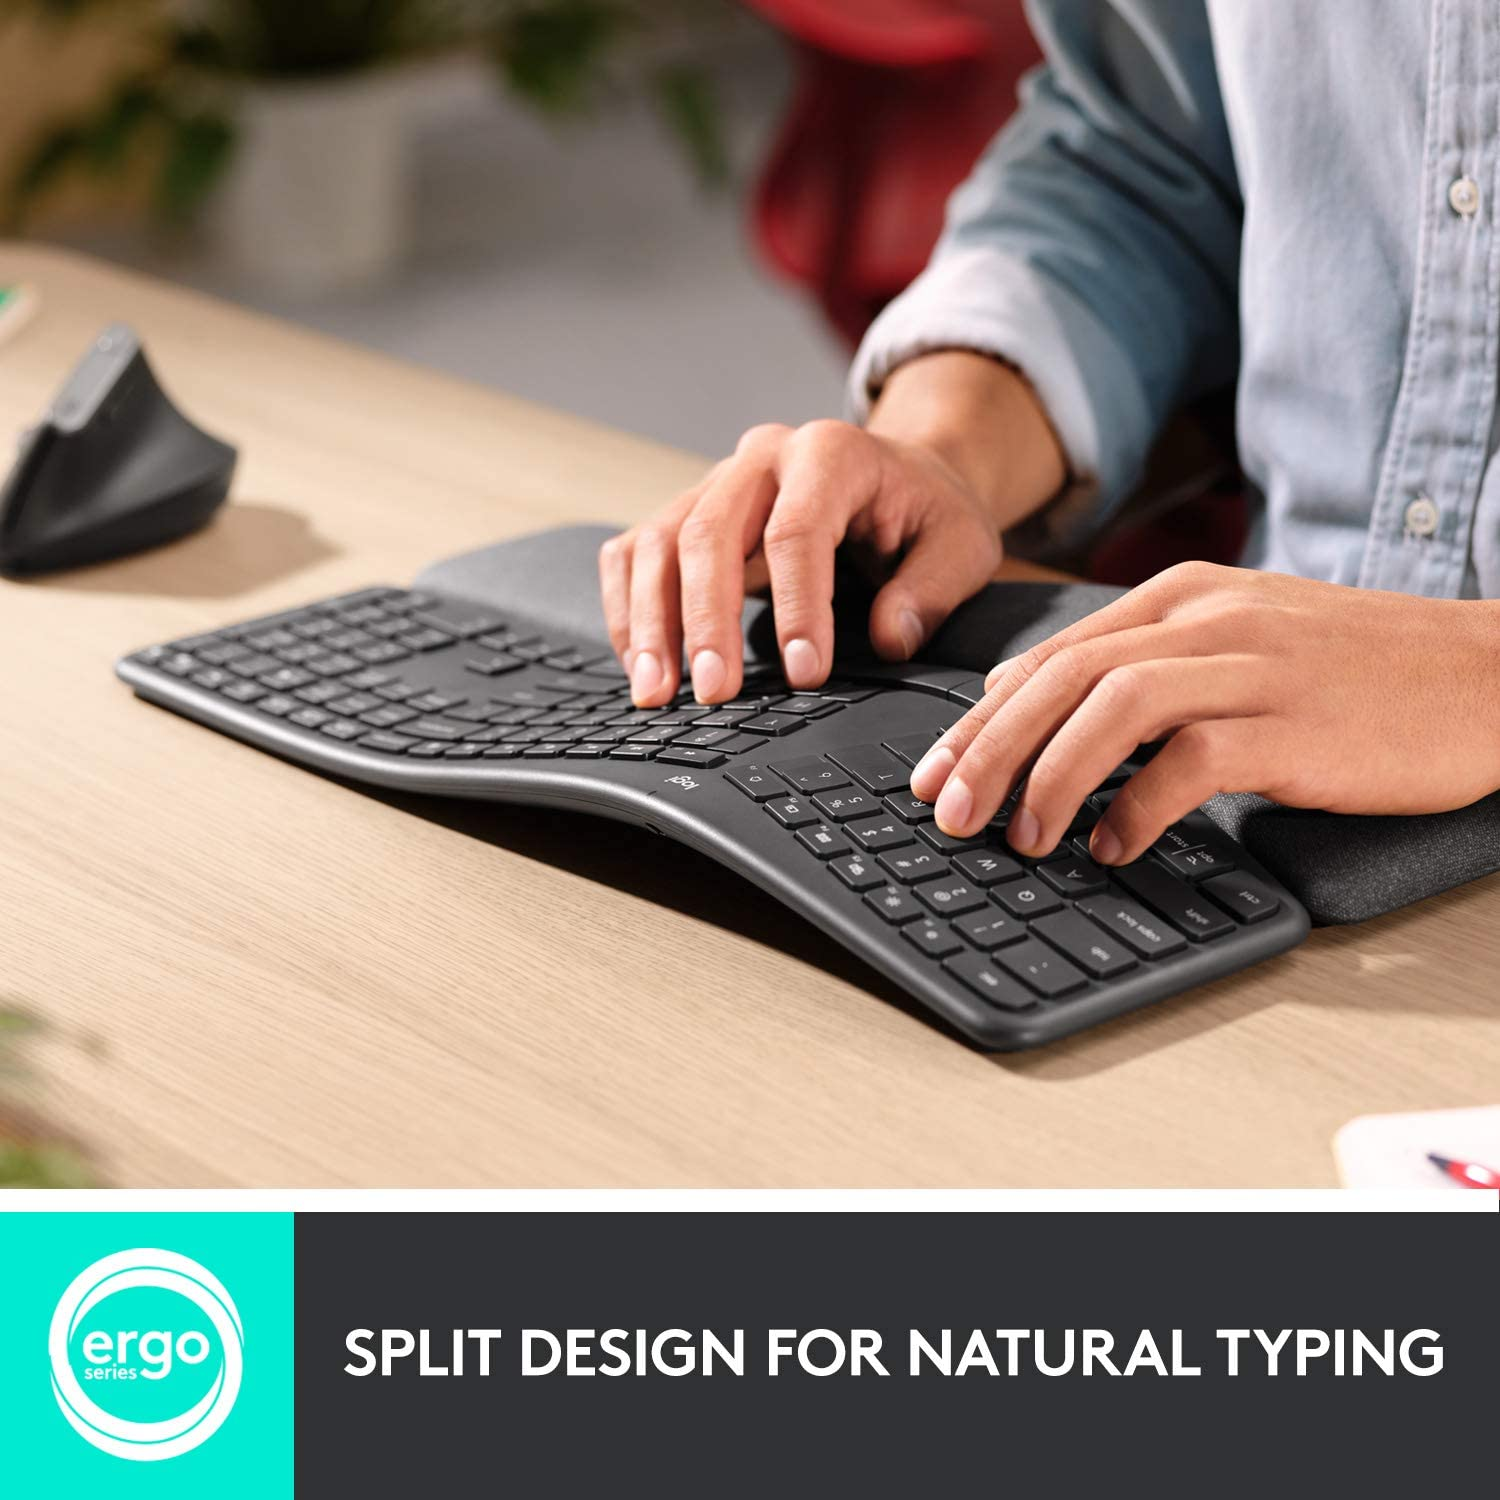 An ergonomic gaming keyboard is the best option, no matter the layout, for preventing discomfort and long-term injuries.